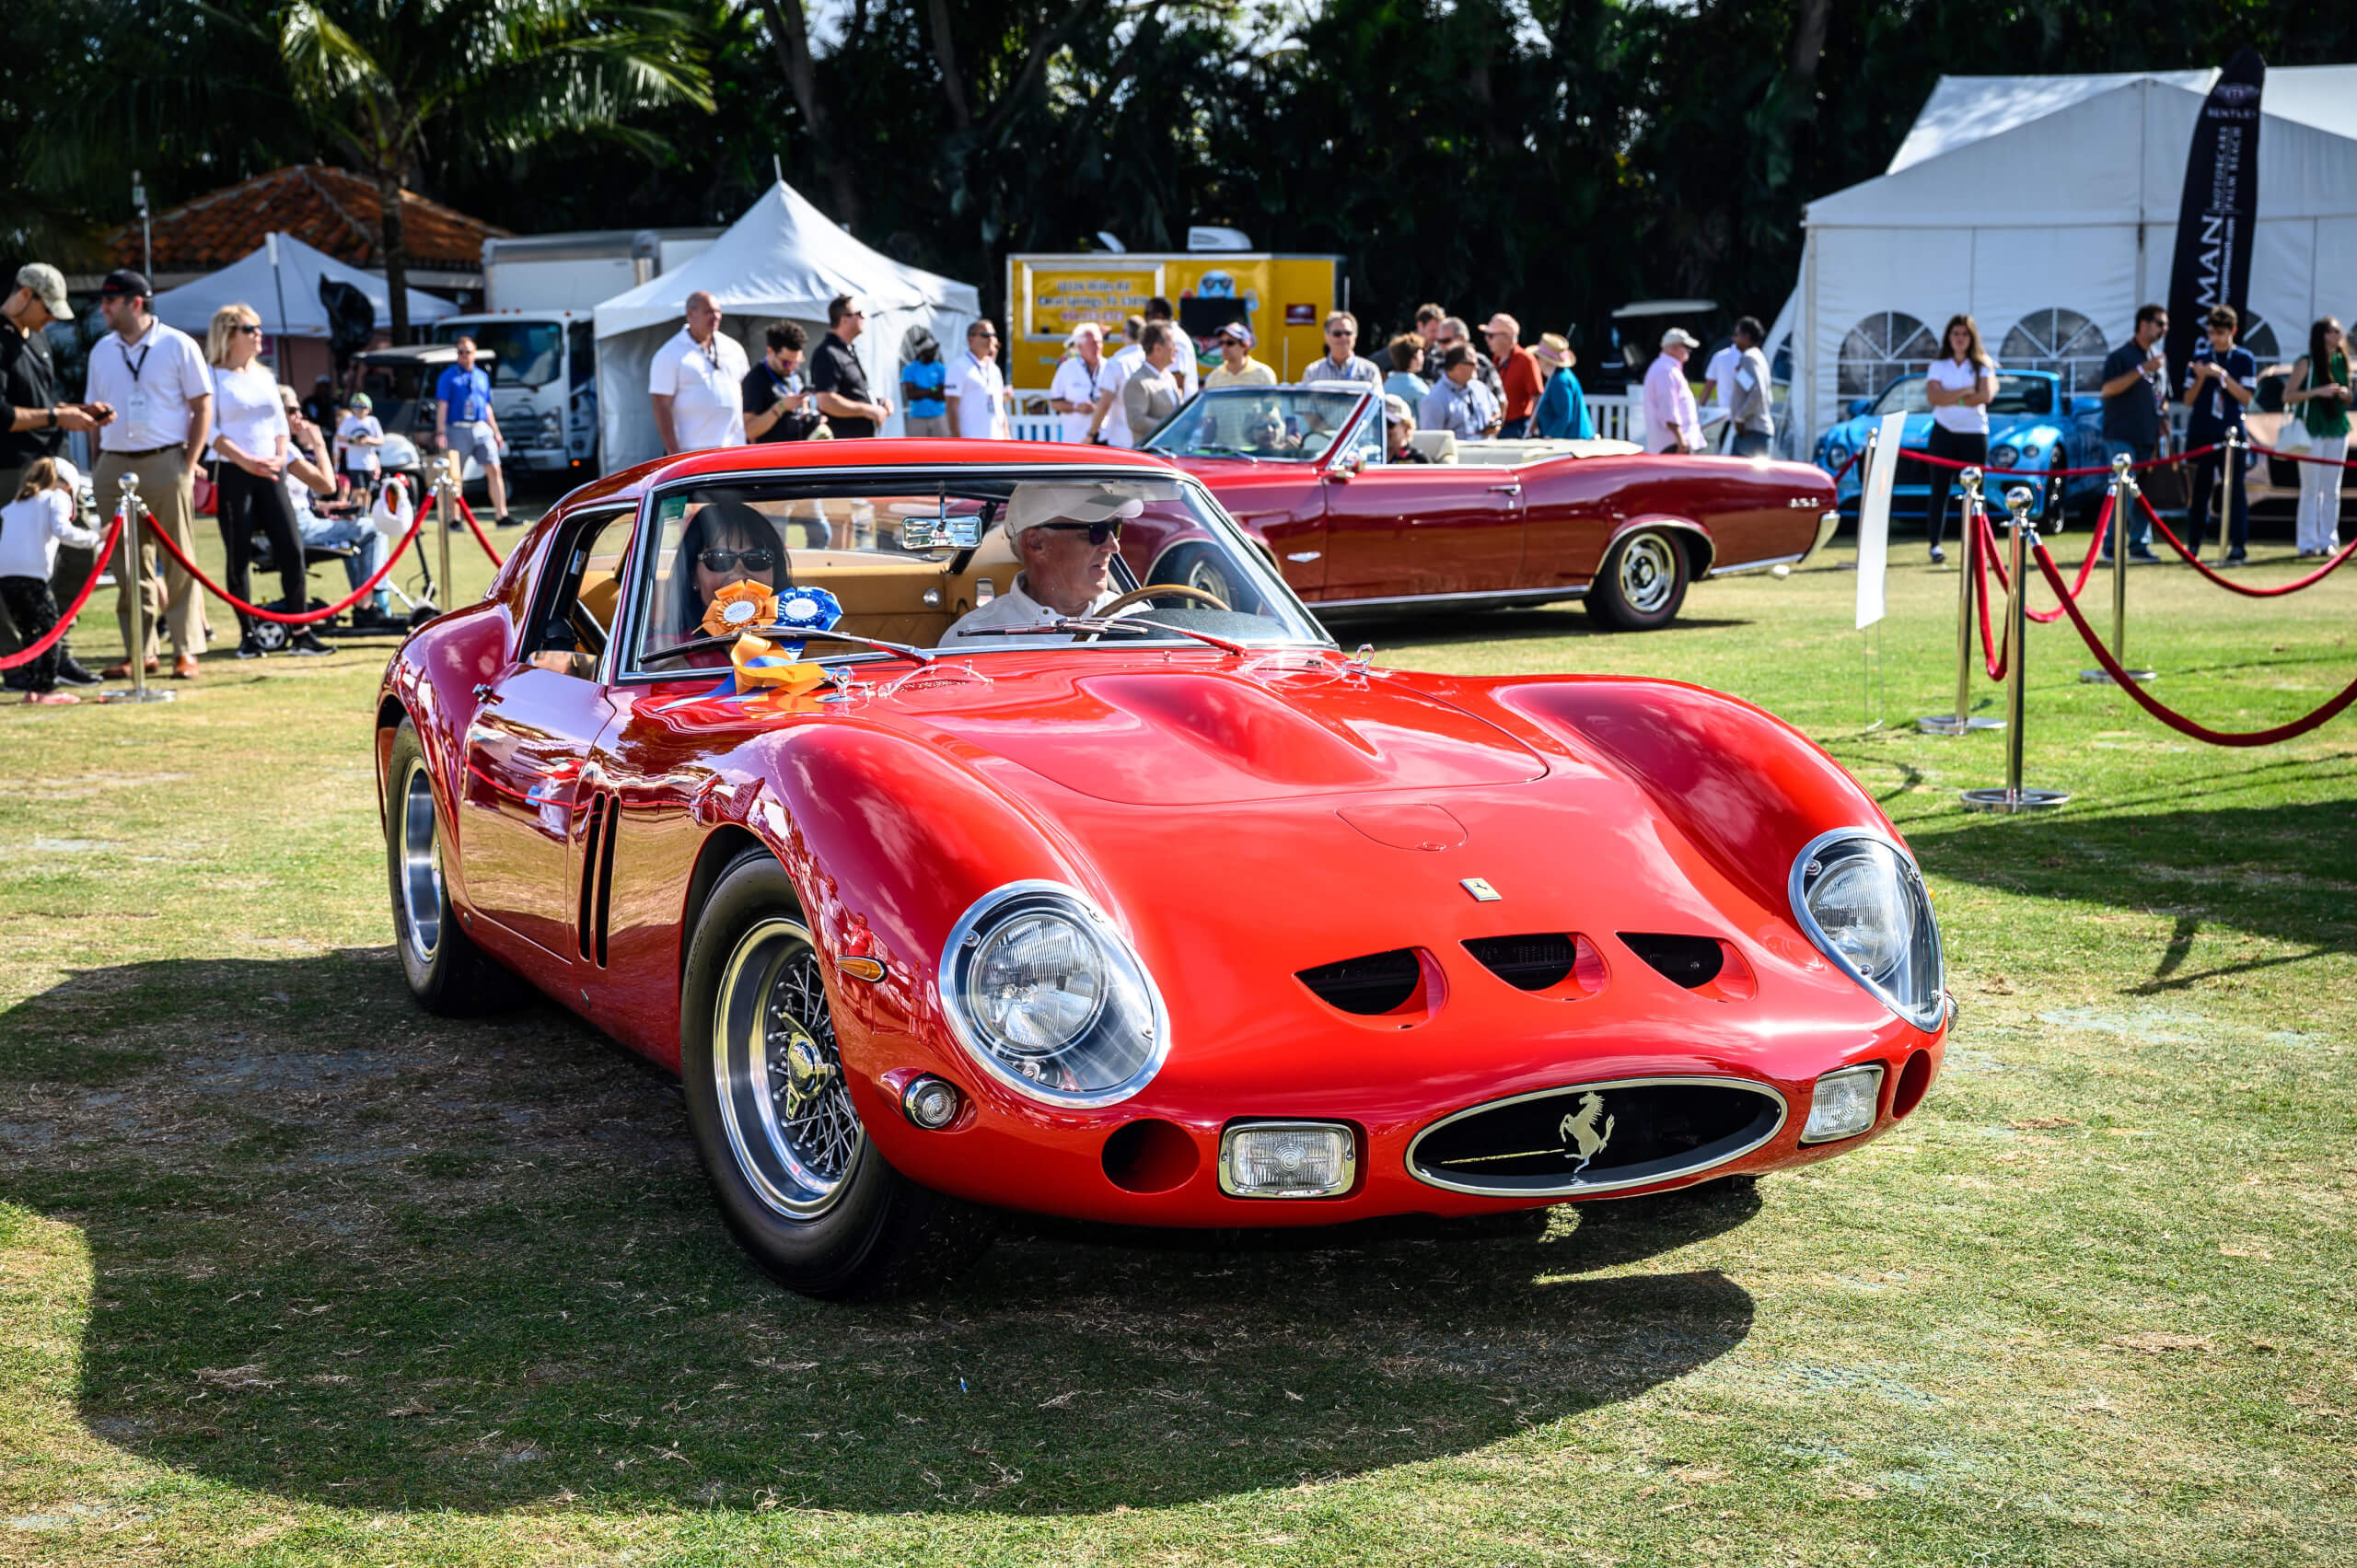 A 1962 Ferrari 250 GTO won the Best of Show at the 2020 Boca Raton Concours d'Elegance.